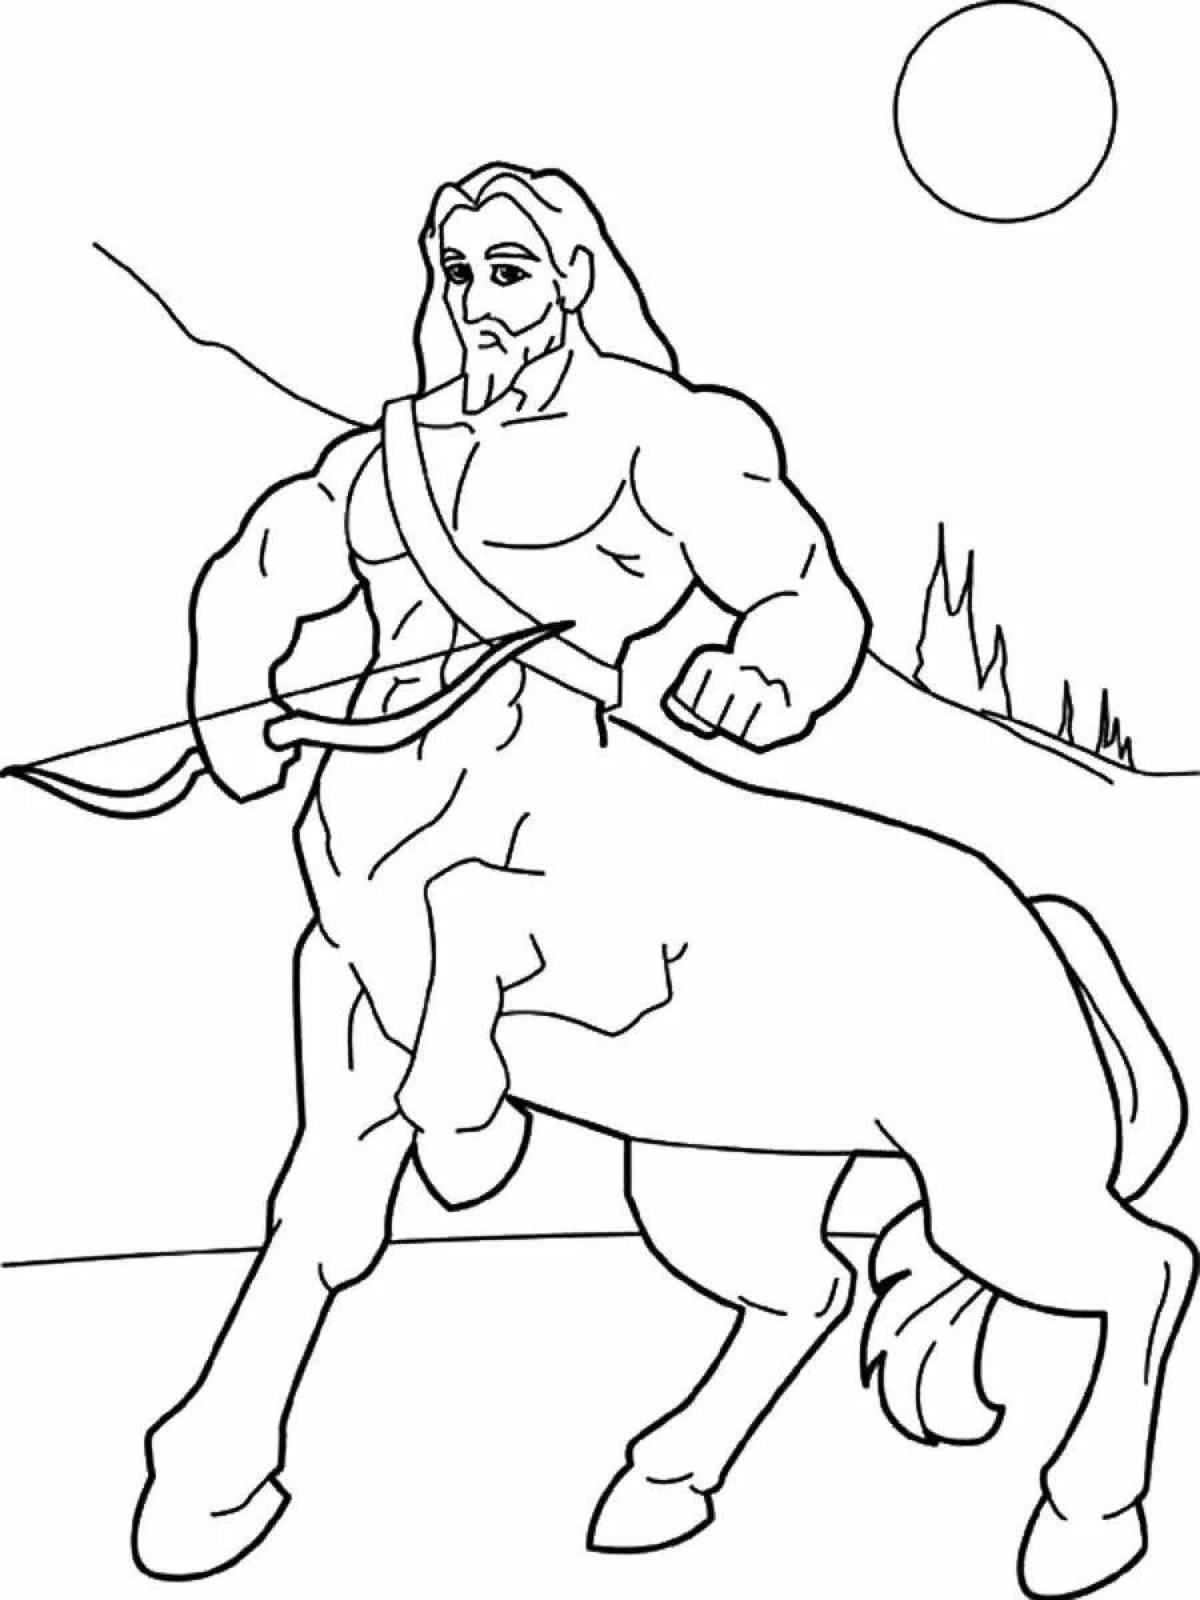 Wonderful centaur coloring pages for kids